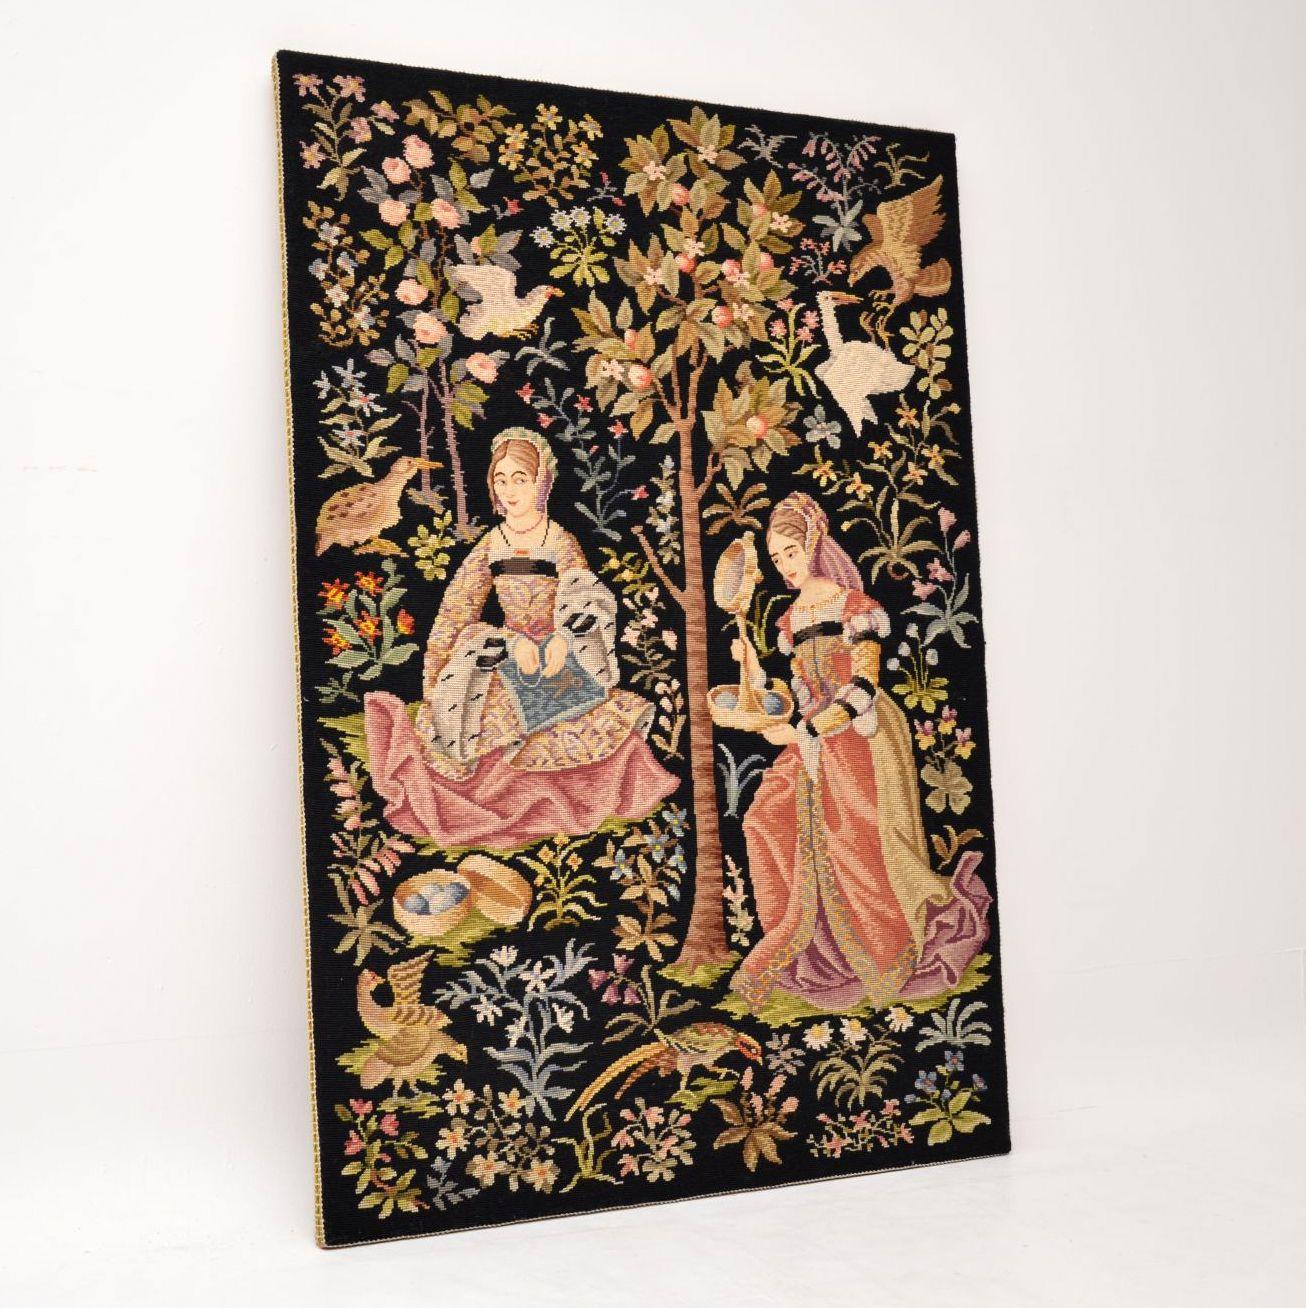 Large antique hand stitched needlepoint tapestry with a colourful scene in very good original condition and dating to circa 1890-1910 period. The scene depicts two ladies surrounded by many different birds, foliage, trees & flowers. Please enlarge